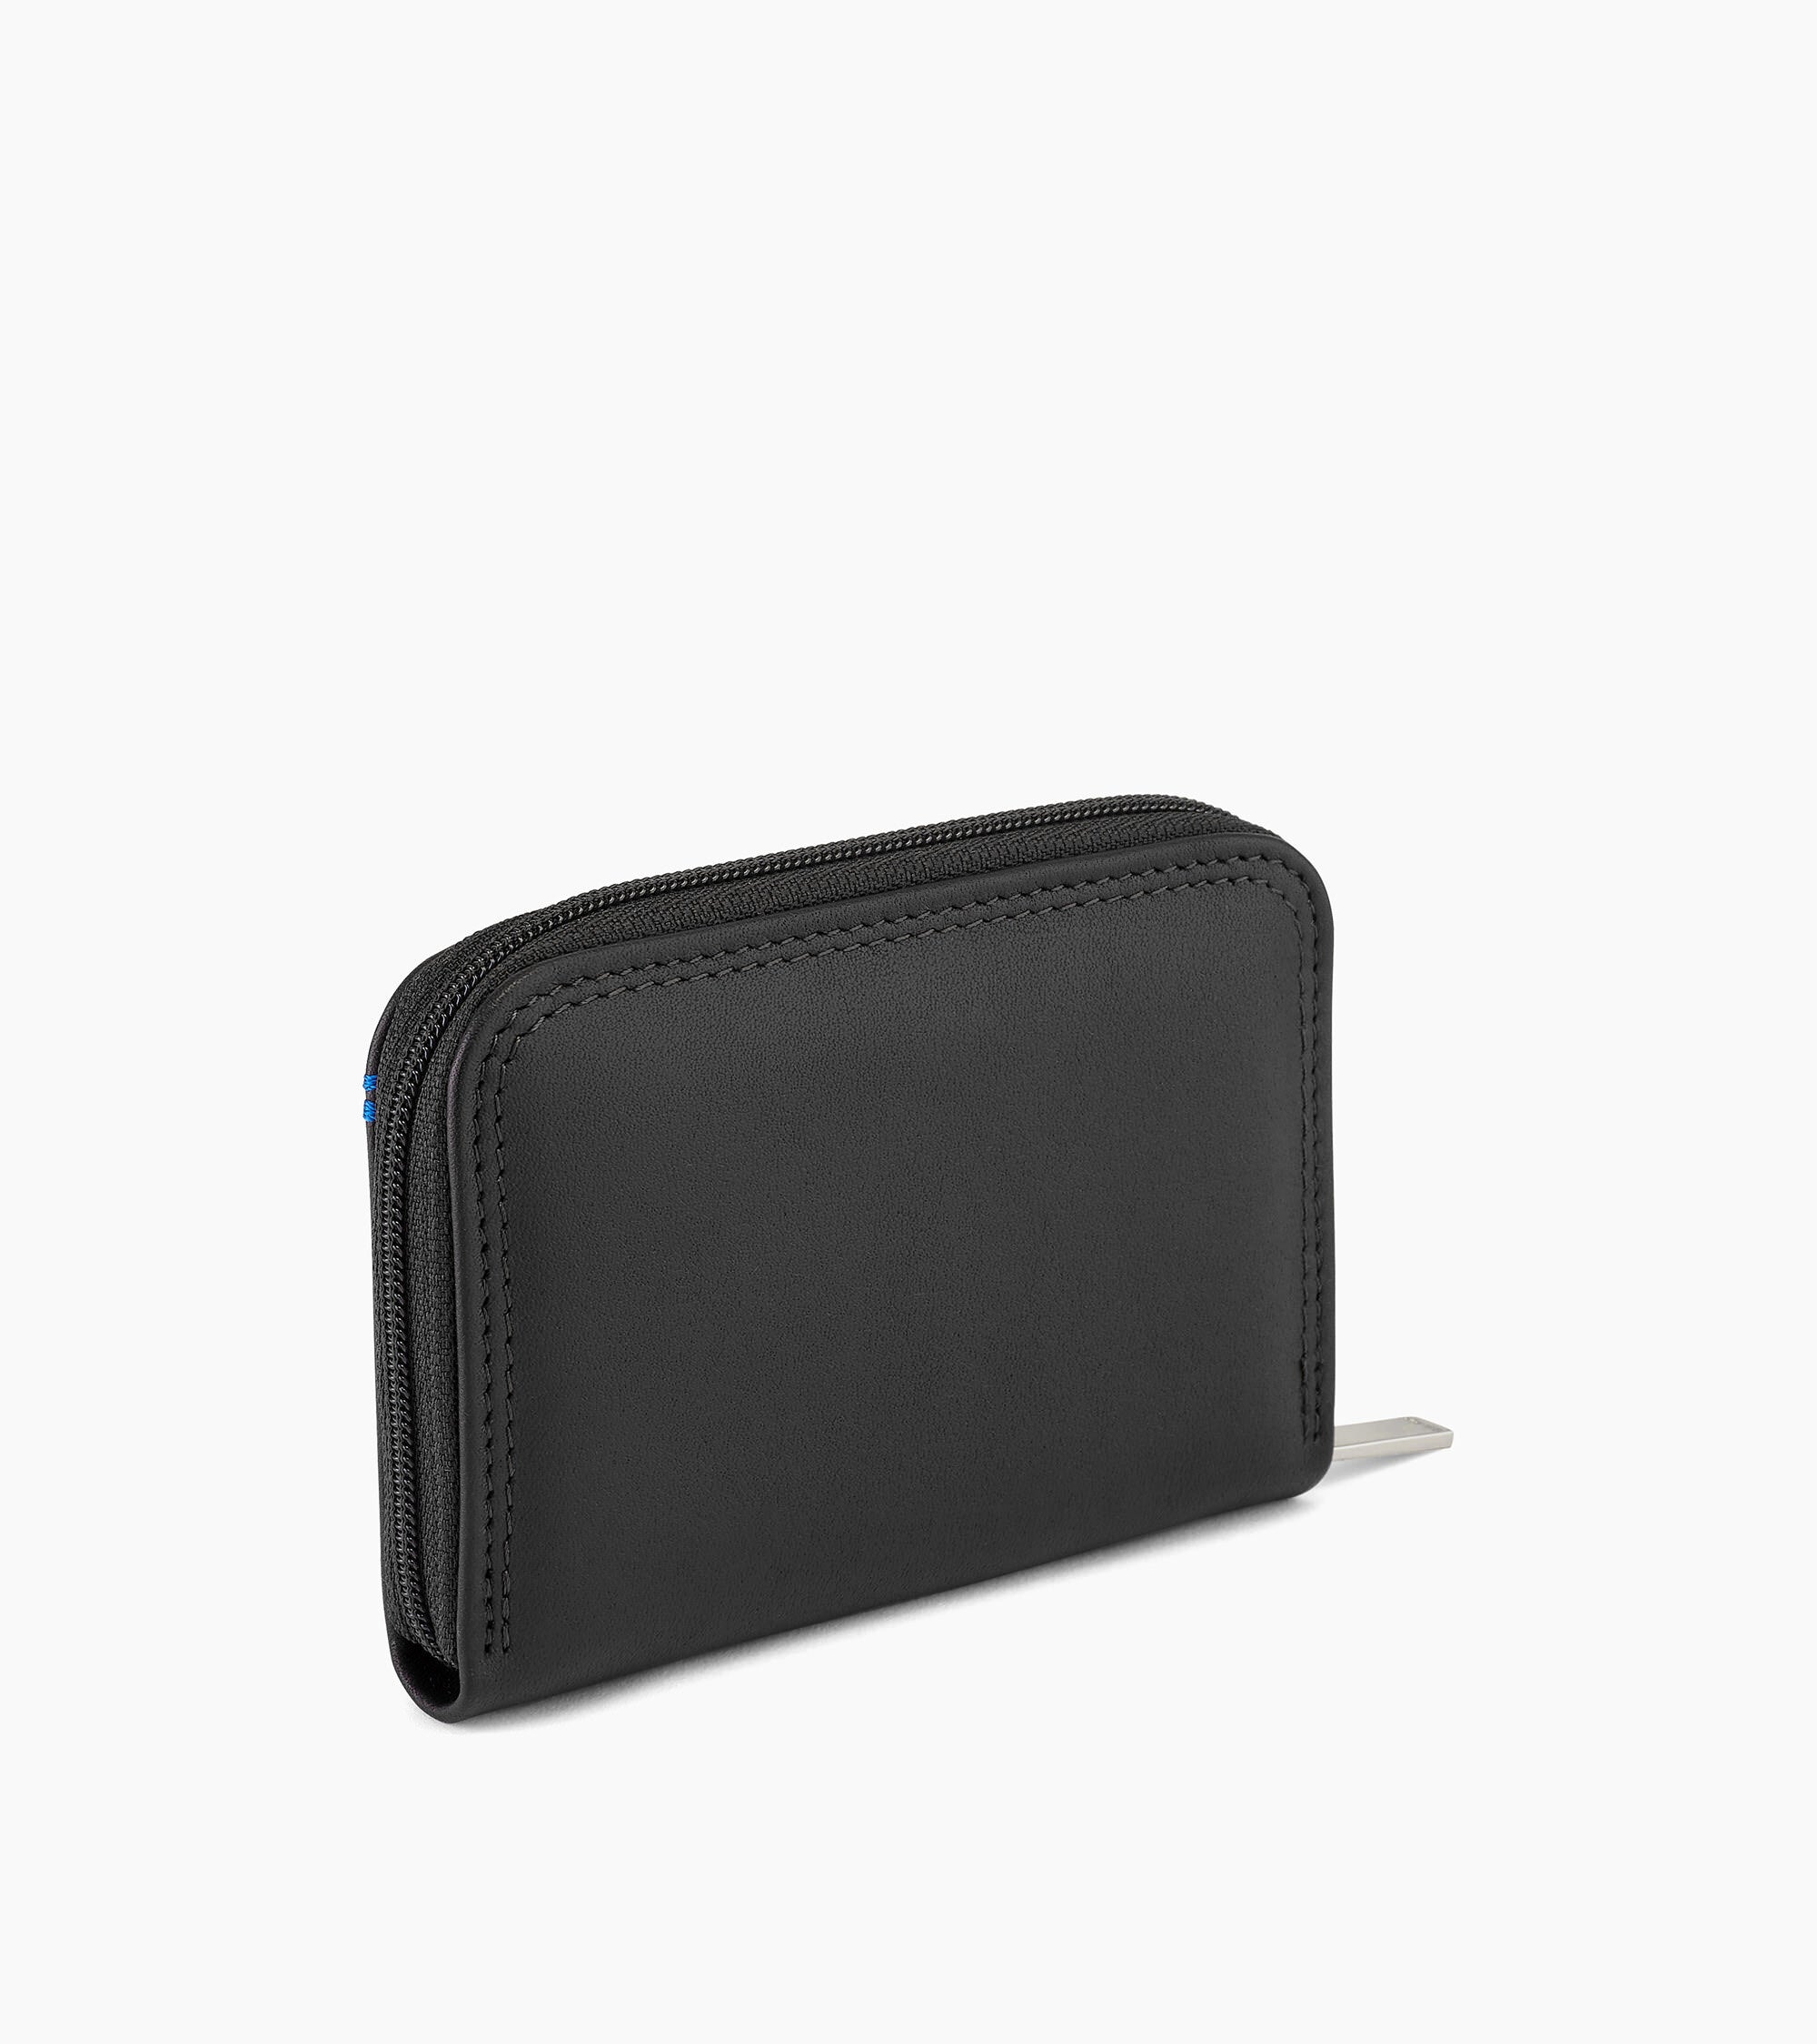 Martin zipped coin purse in smooth leather